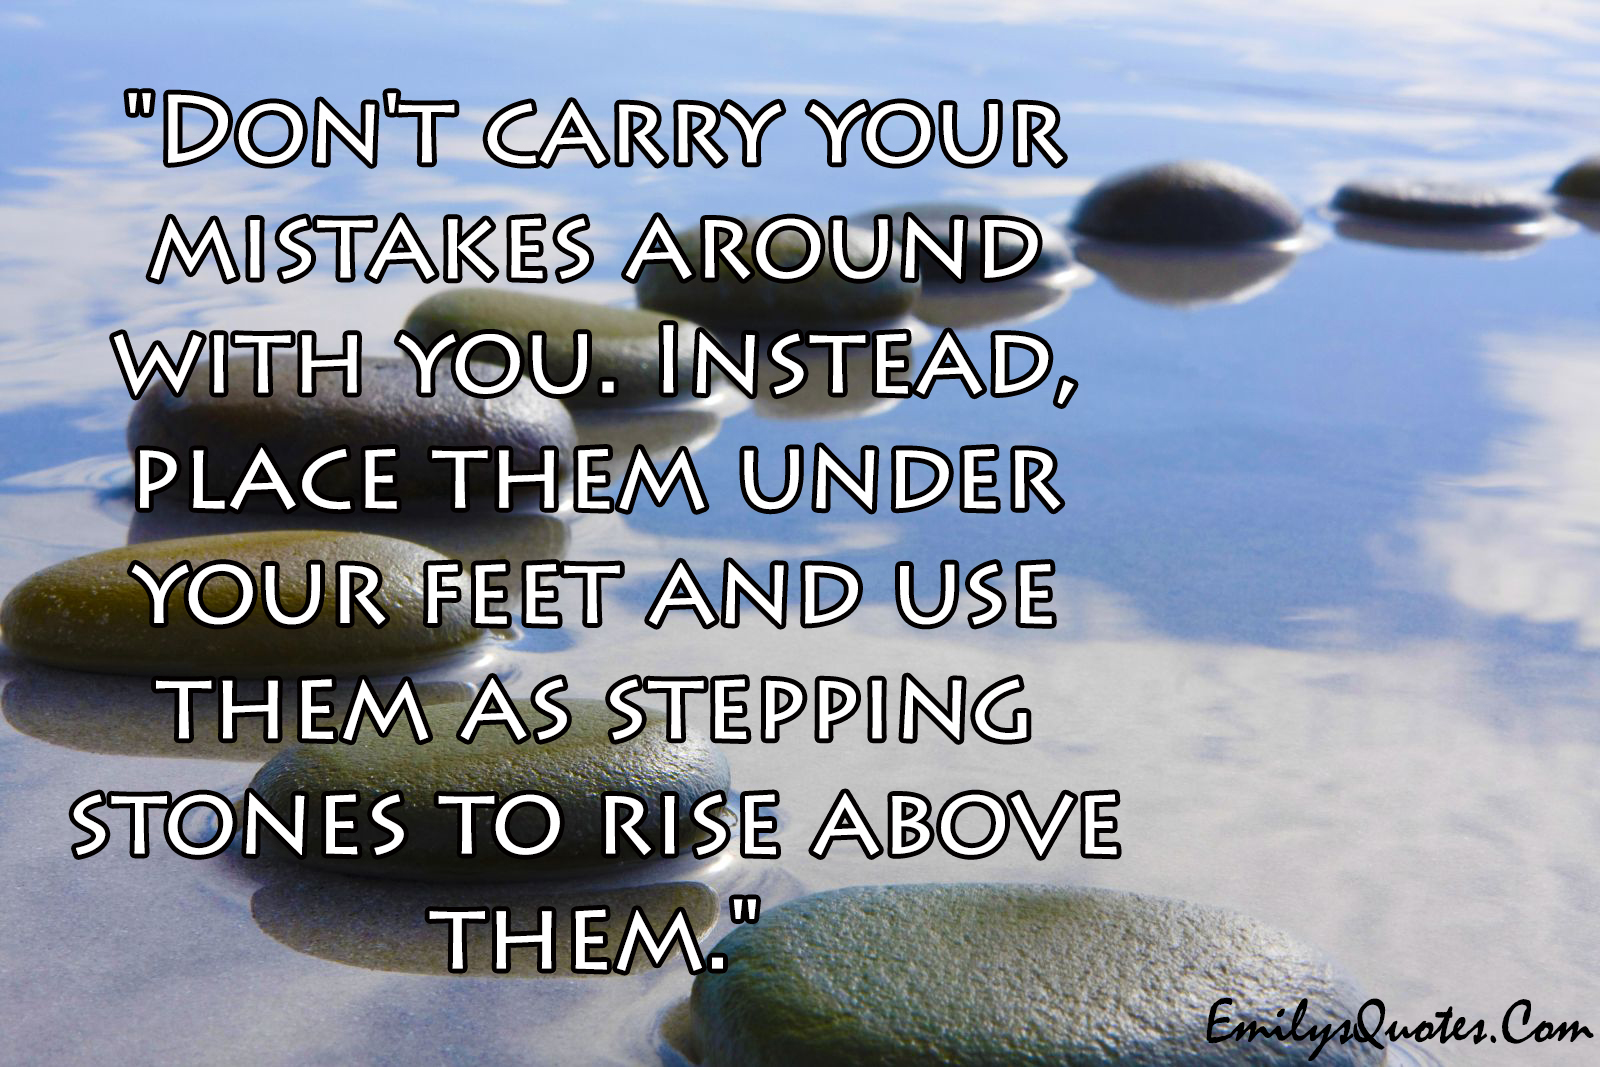 Don’t carry your mistakes around with you. Instead, place them under your feet and use them as stepping stones to rise above them